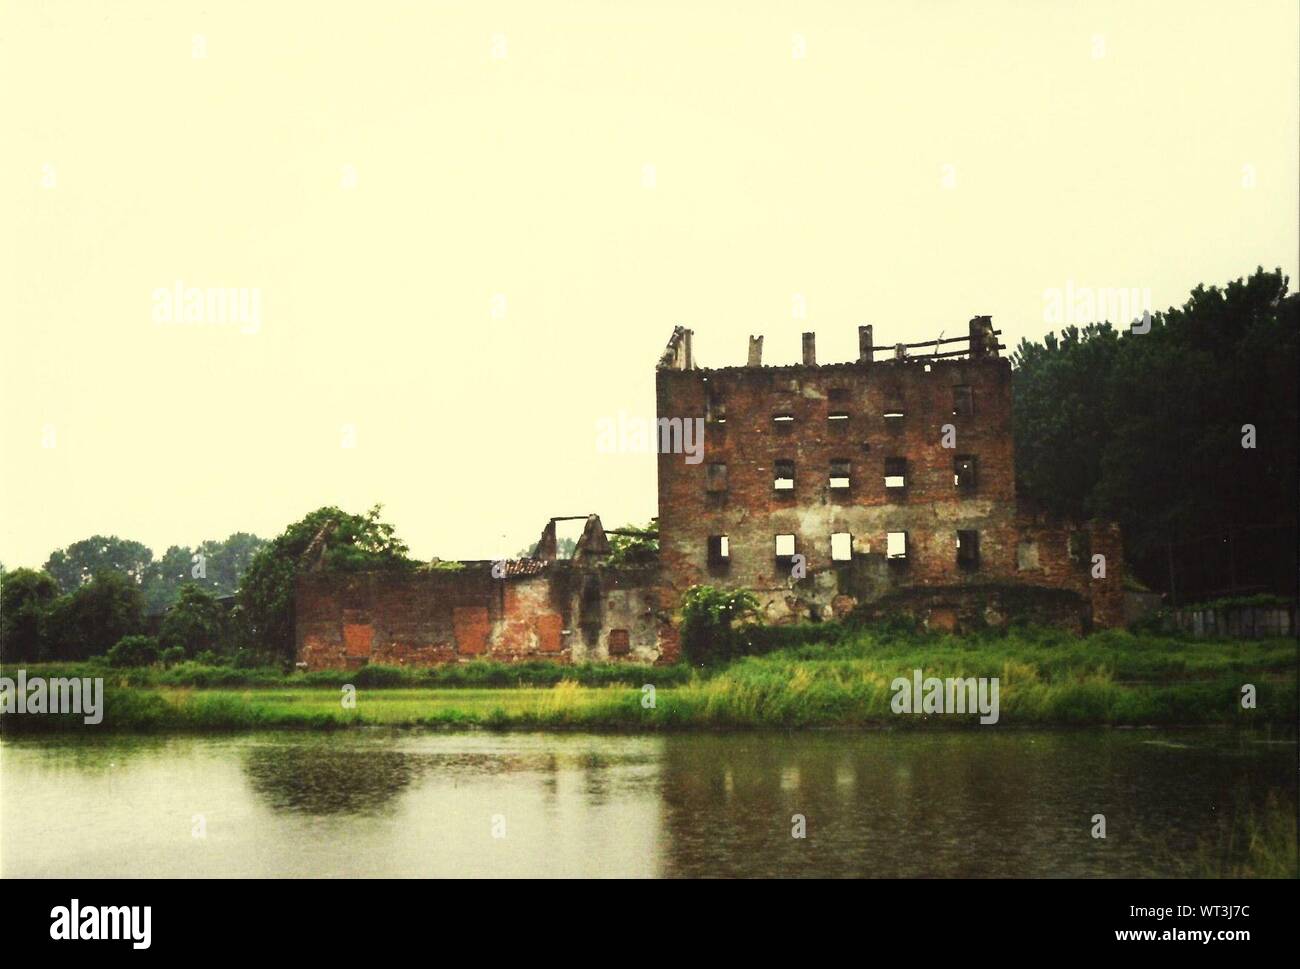 Ruined Buildings On Riverbank Stock Photo